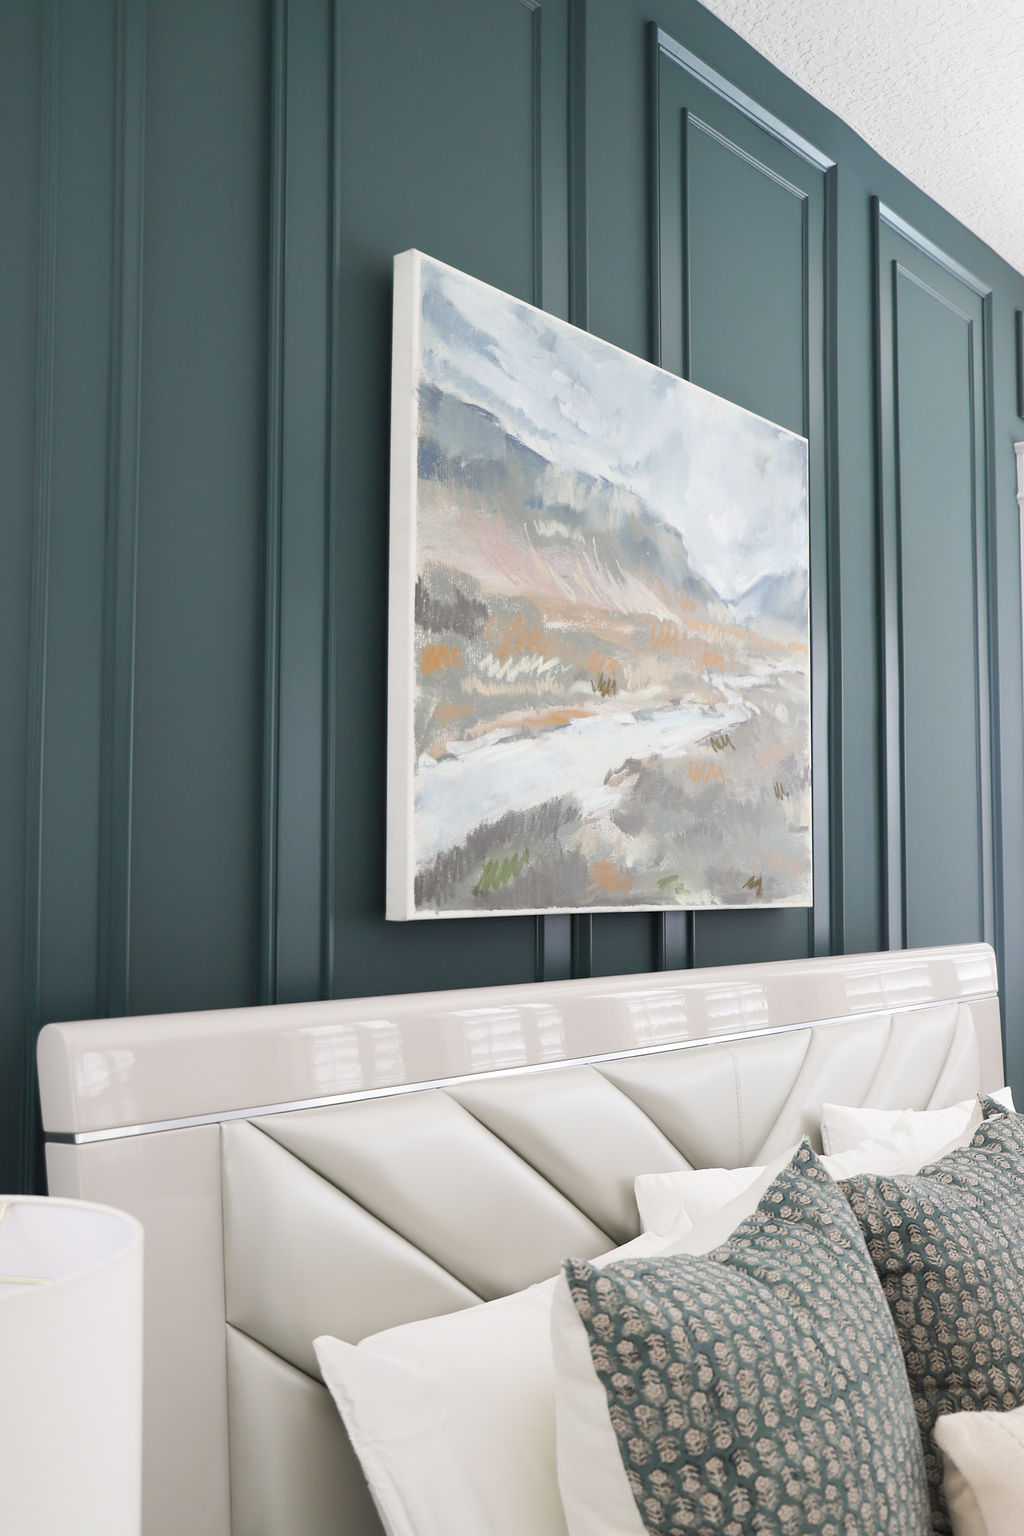 Welcome Home styling designed this dark green accent wall to blend seamlessly with the homes modern coastal style. 